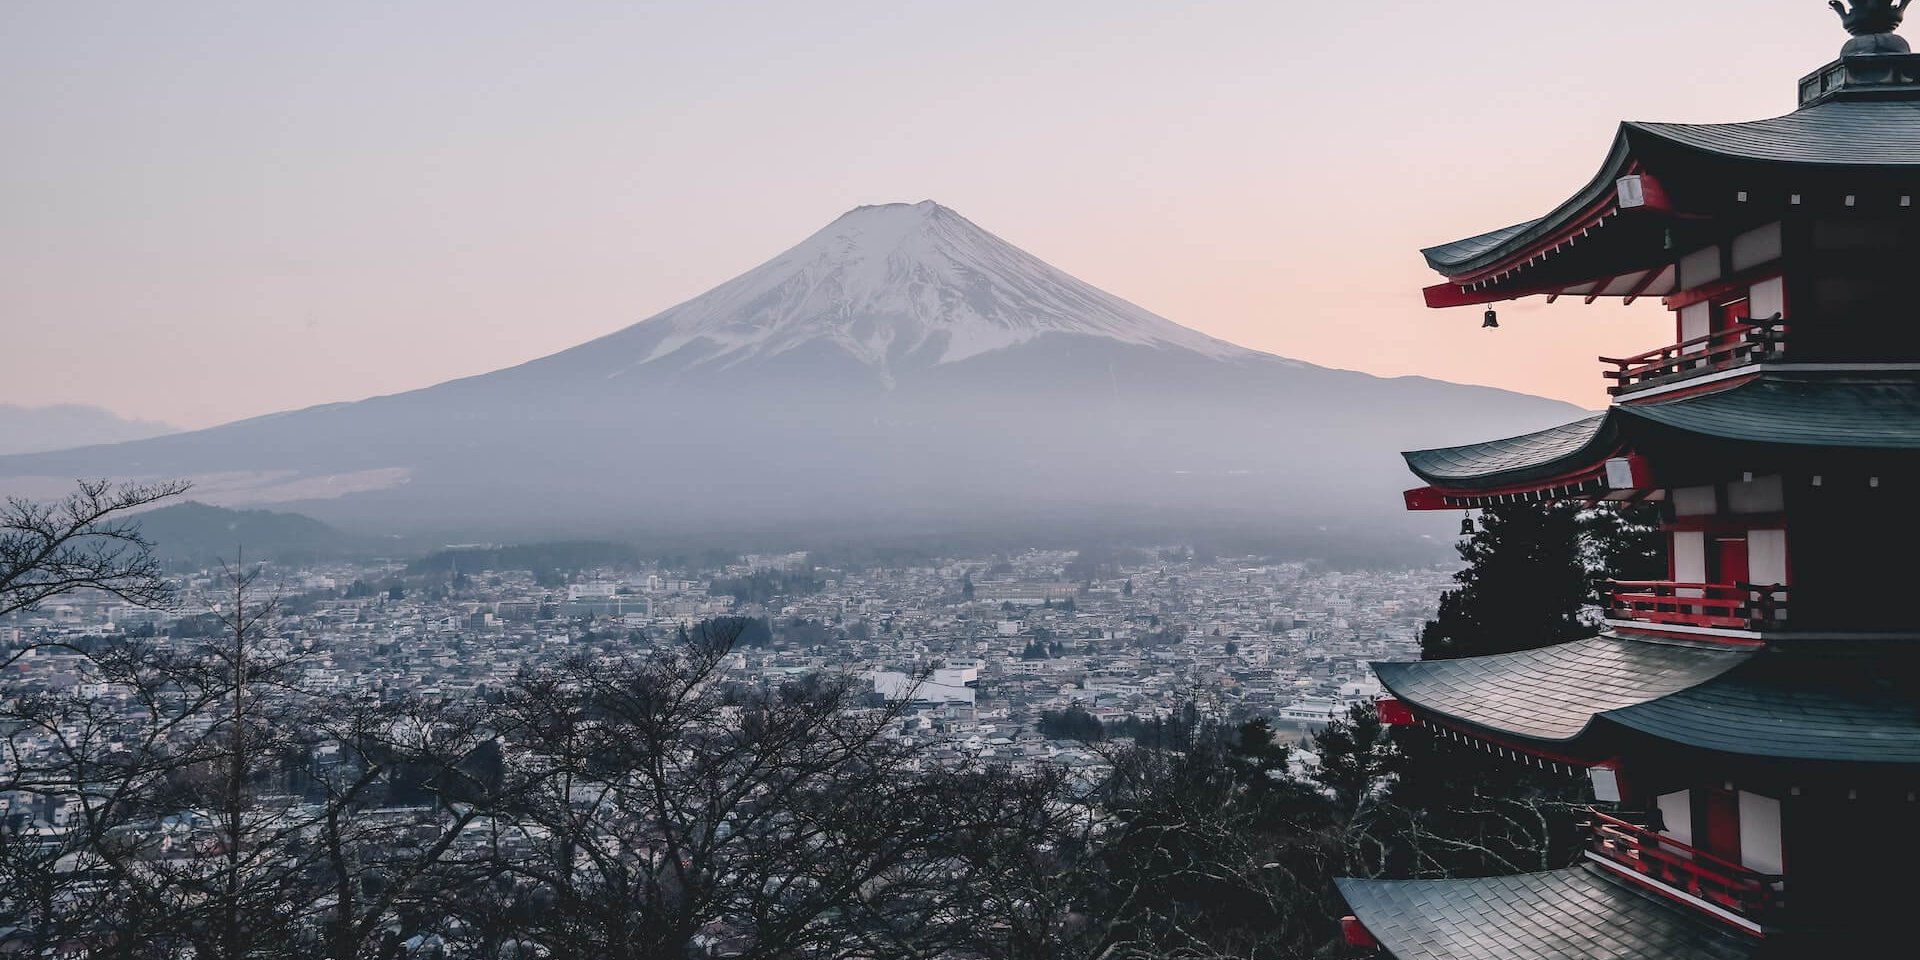 Pagoda in Japan with summit mountain